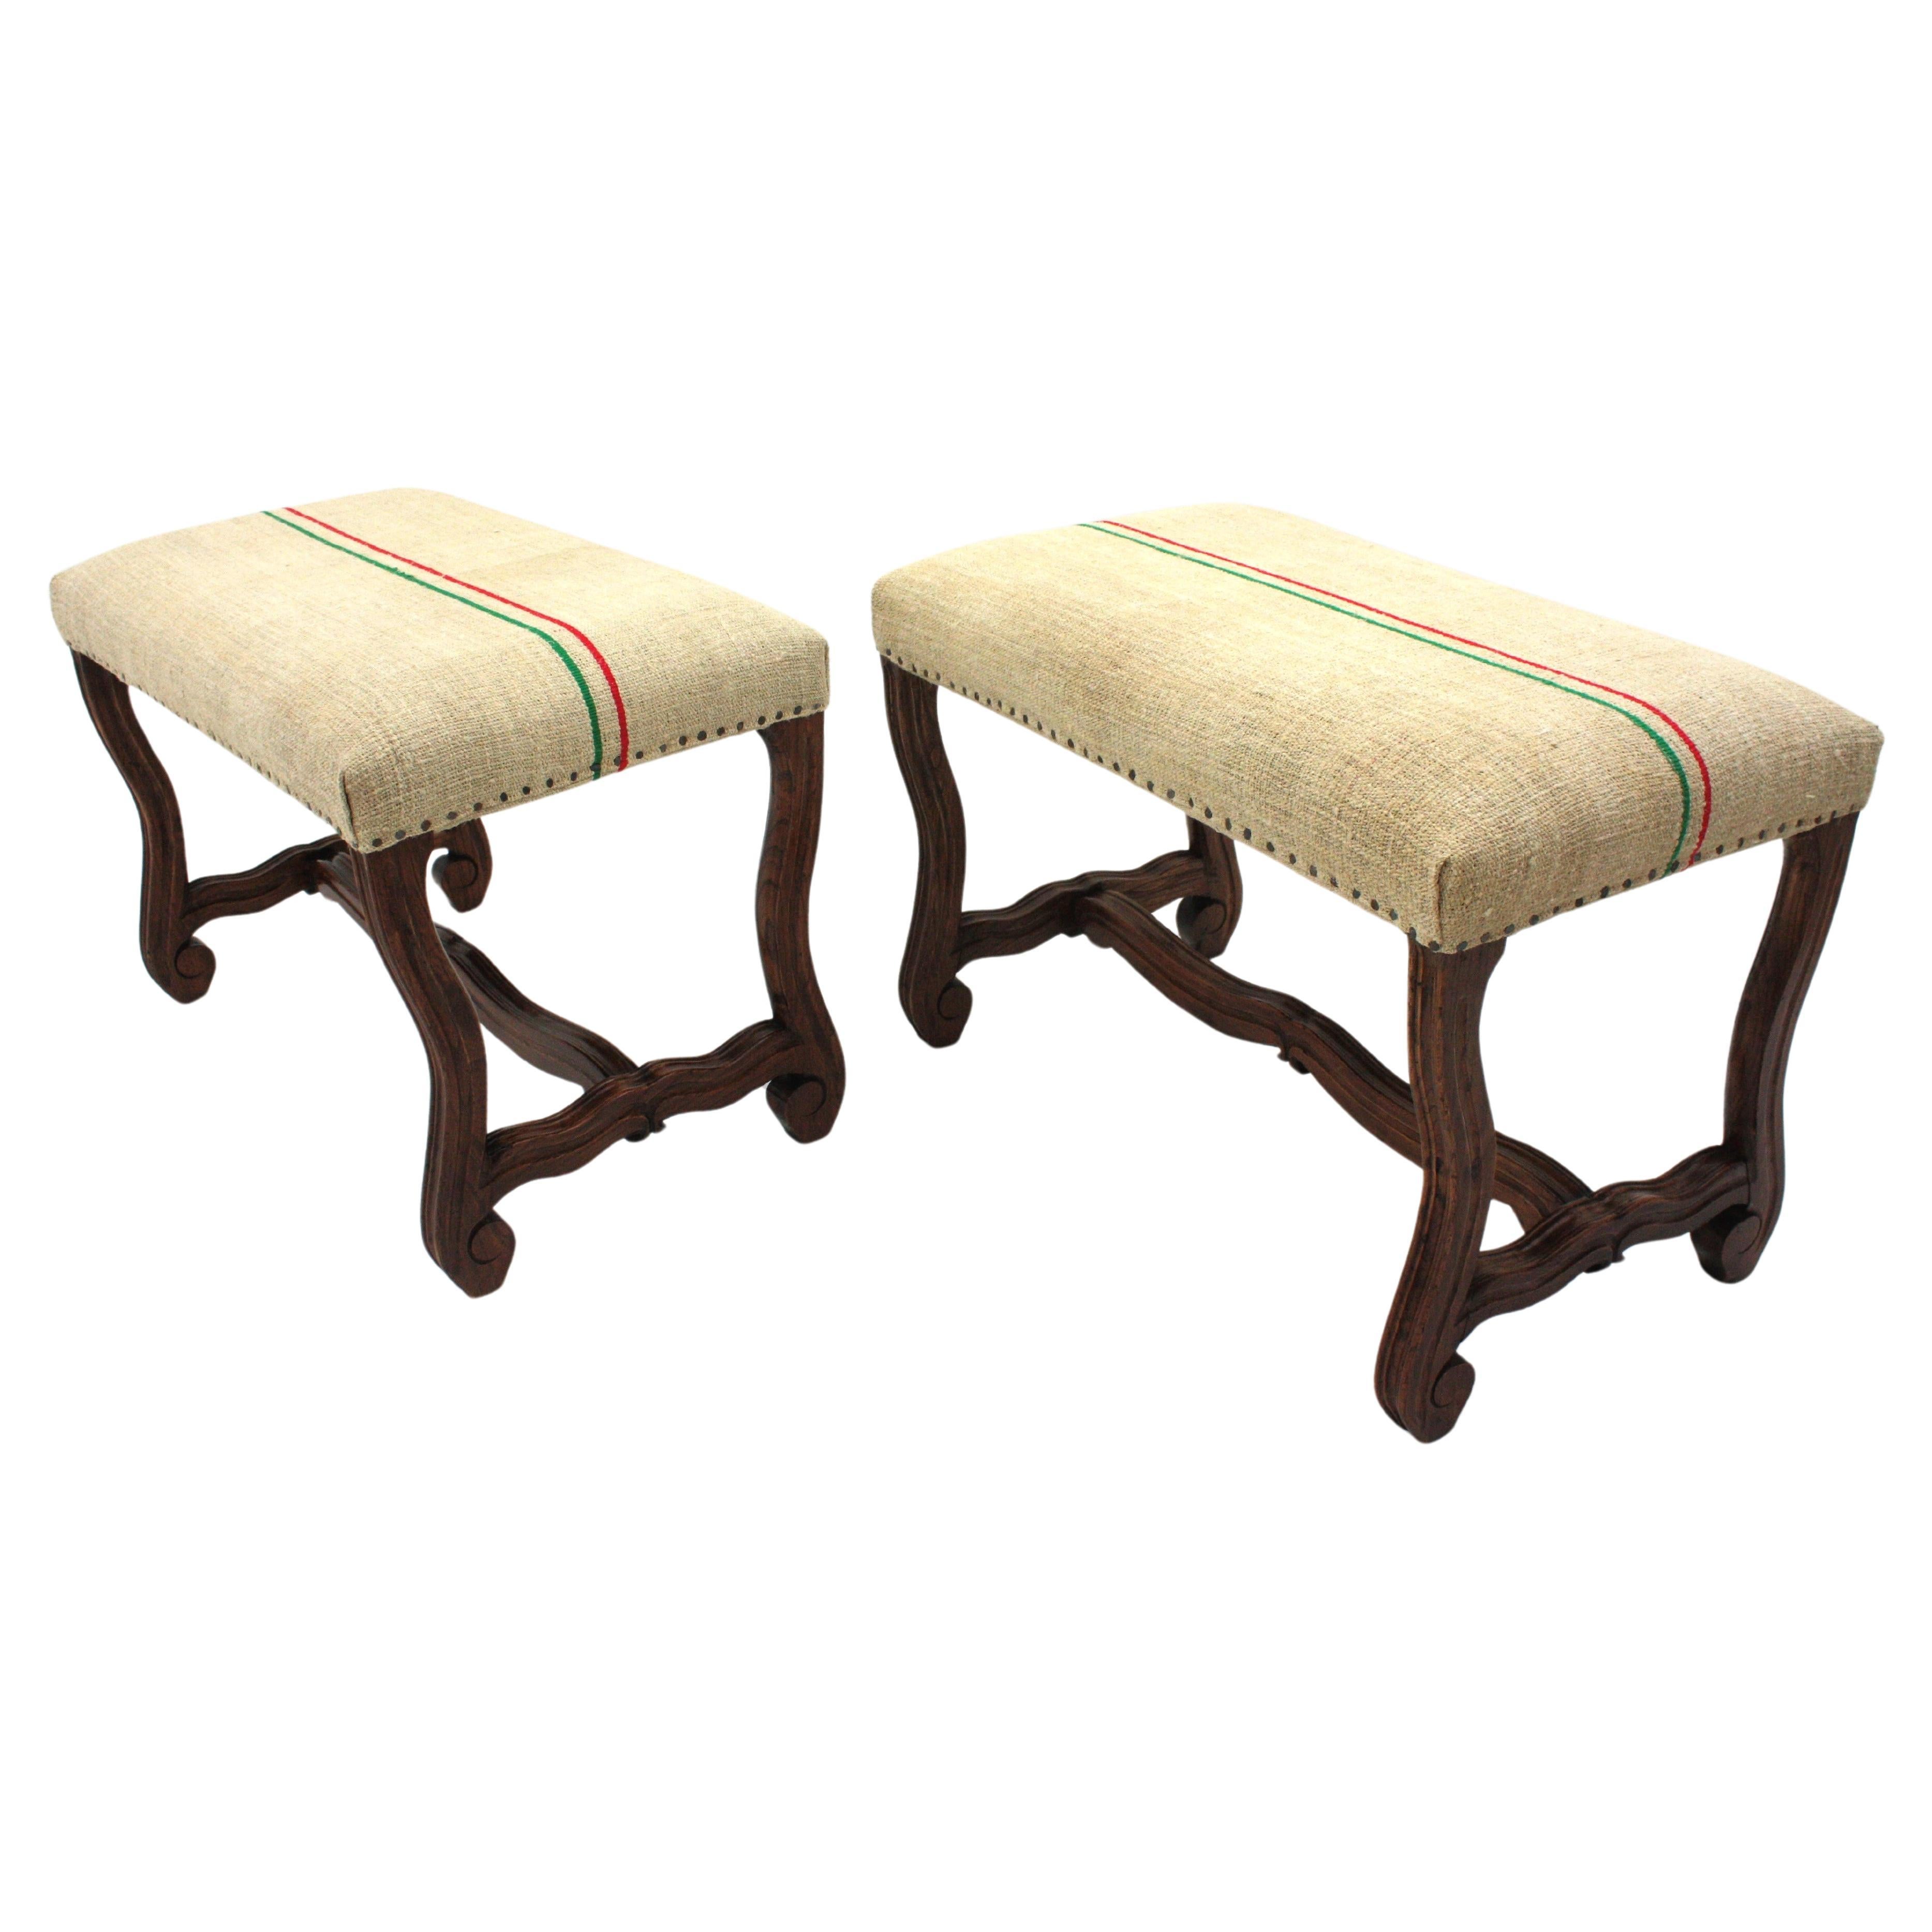 French Os de Mouton Oak Stools, Pair
Os de Mouton Louis XIV Pair of Oak Stools / Benches with French Linen Upholstery
Pair of Louis XIV style Os de Mouton legs stools in french vintage linen upholstery, France, 1930s
An early 20th century backless